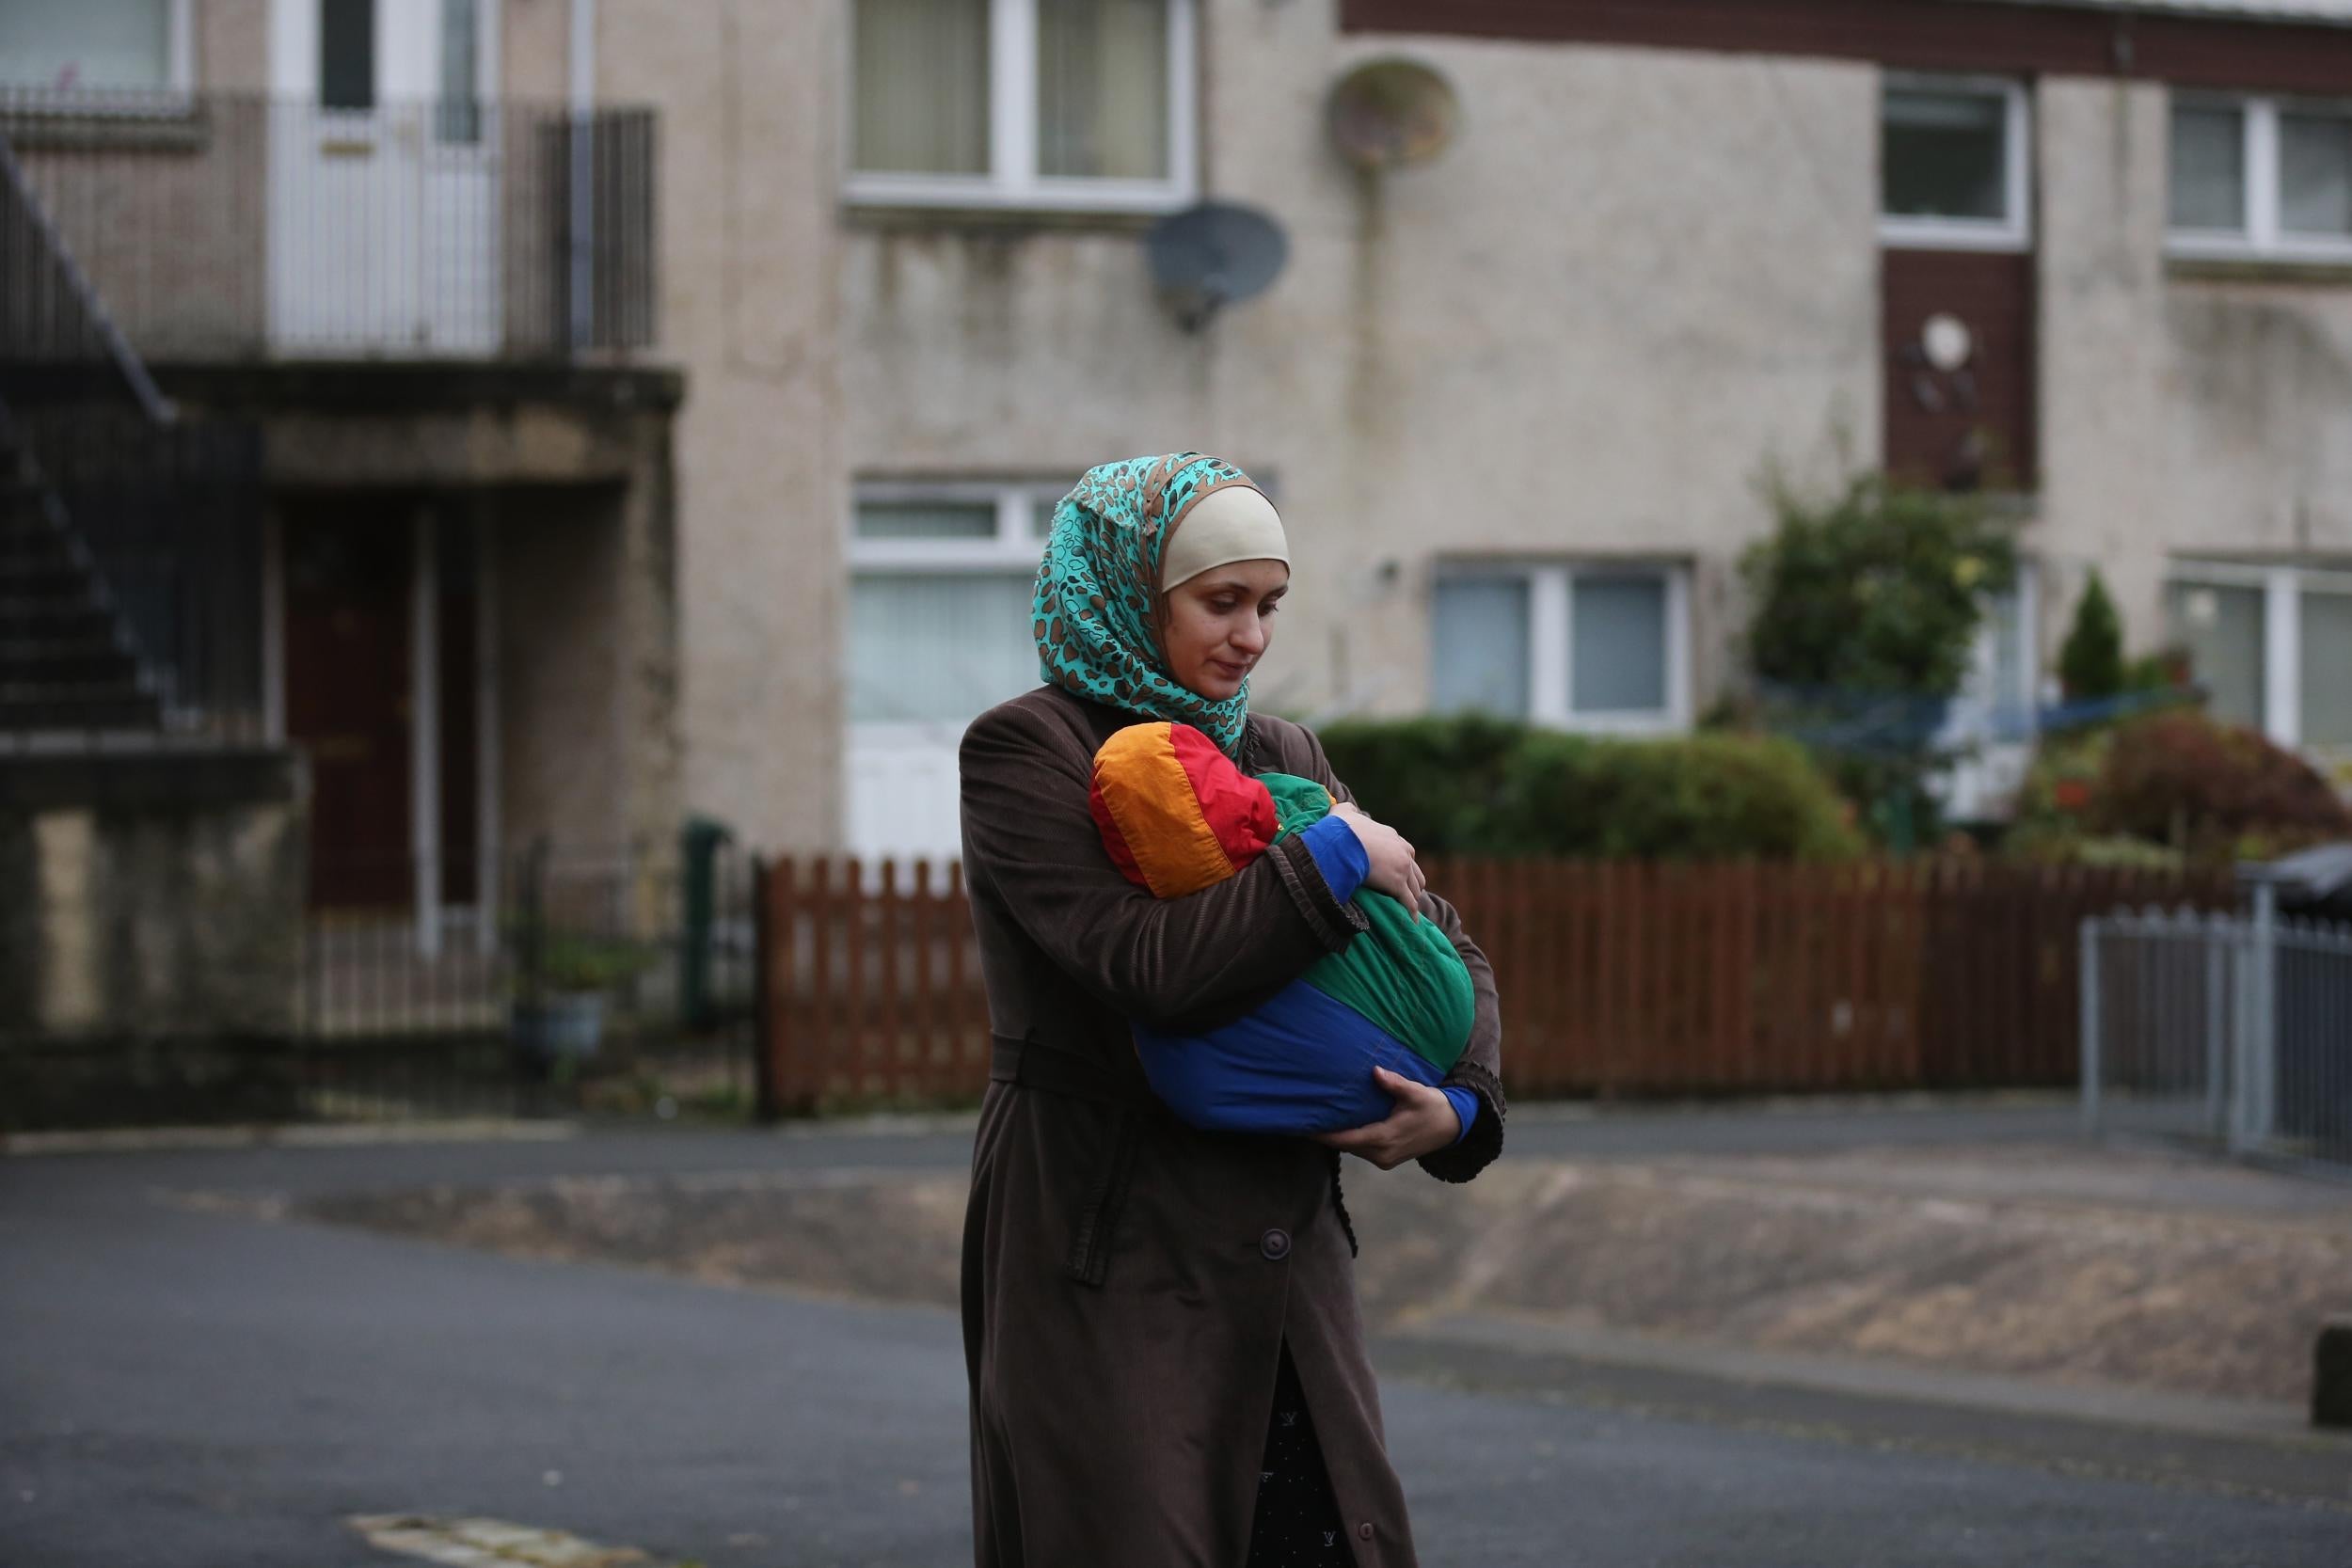 A refugee arrives at her new home in the UK in December, 2015